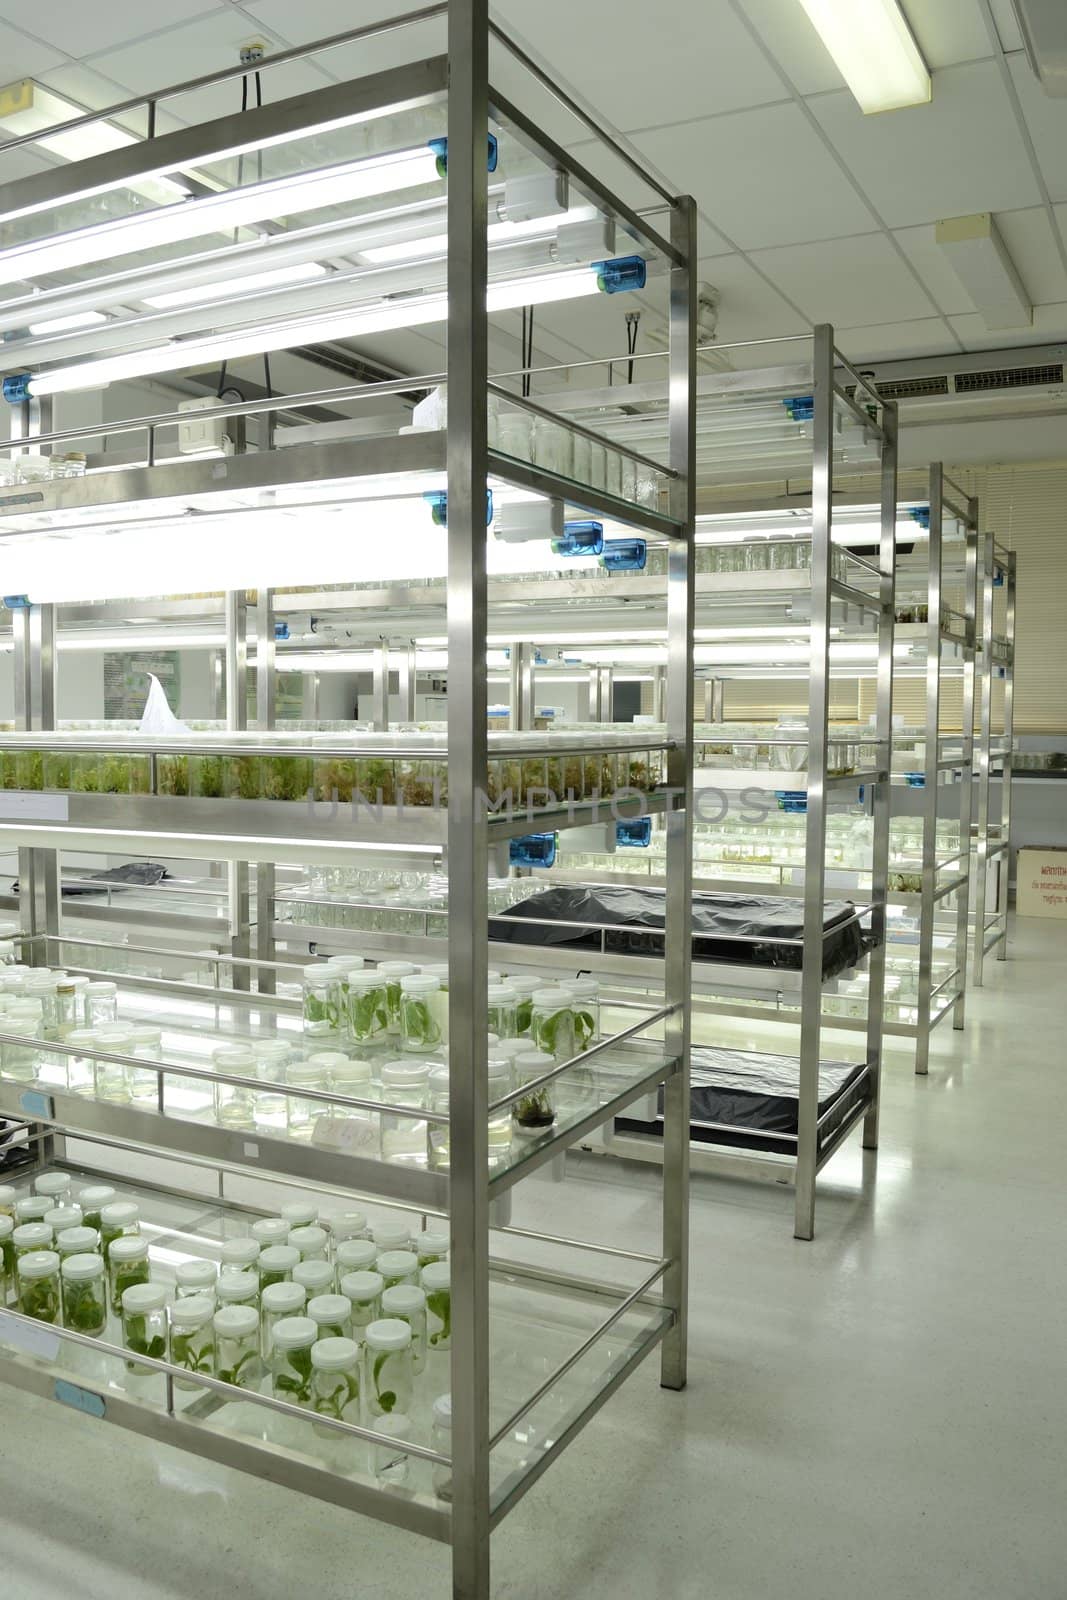 experiment of plant tissue culture in the laboratory